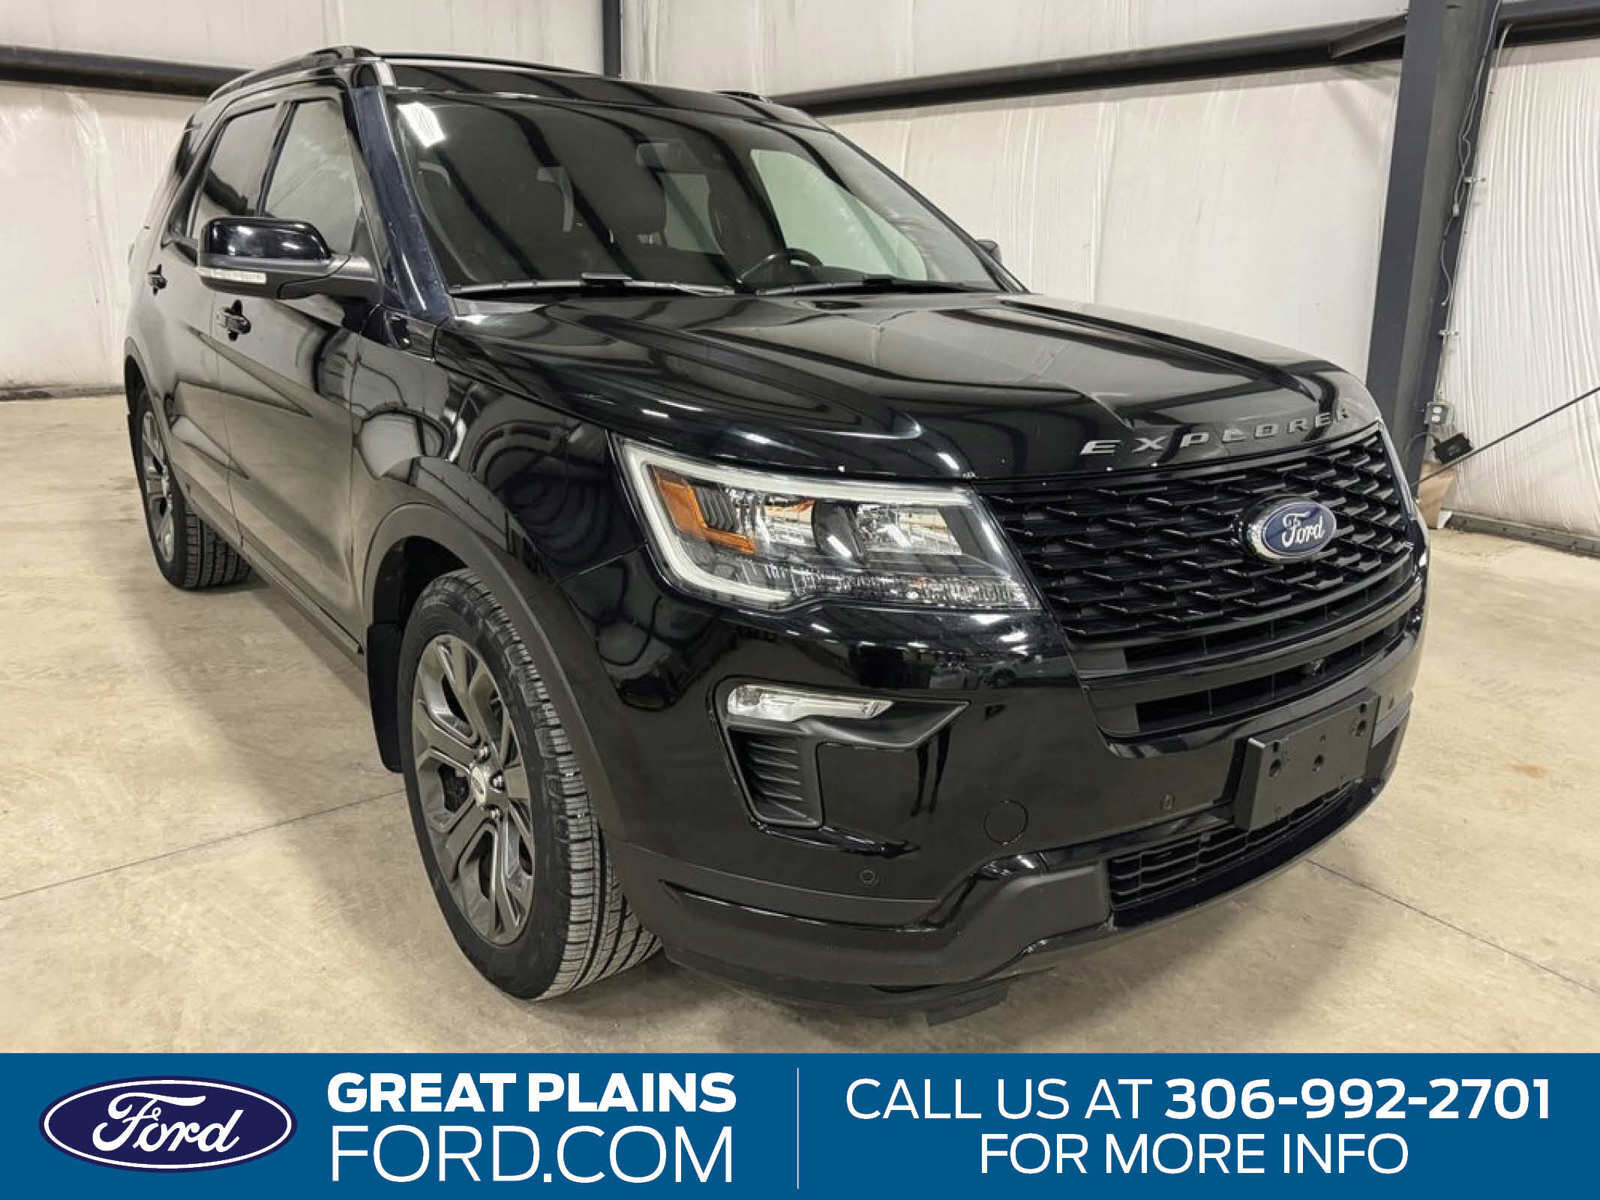 2018 Ford Explorer Sport | 4x4 | Leather Heated/Cooled Leather Seats 